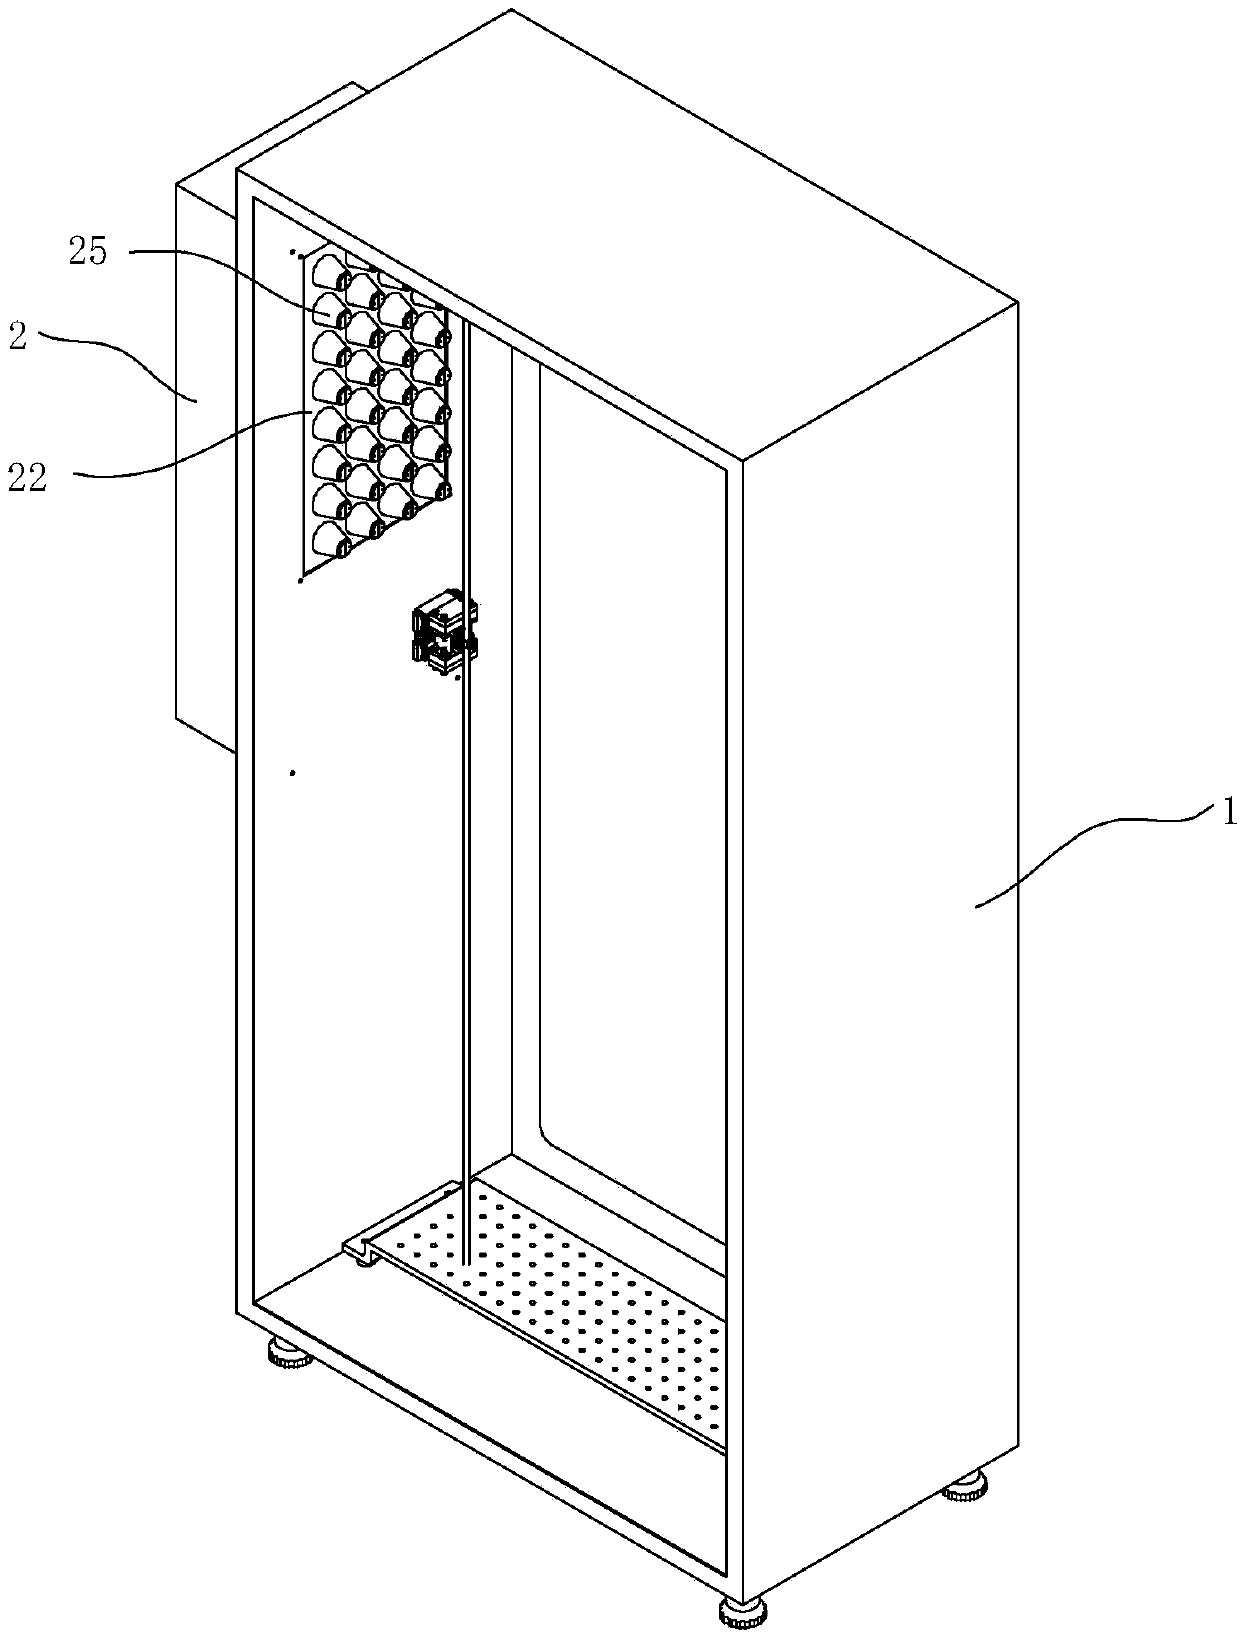 Fully-sealed power distribution cabinet